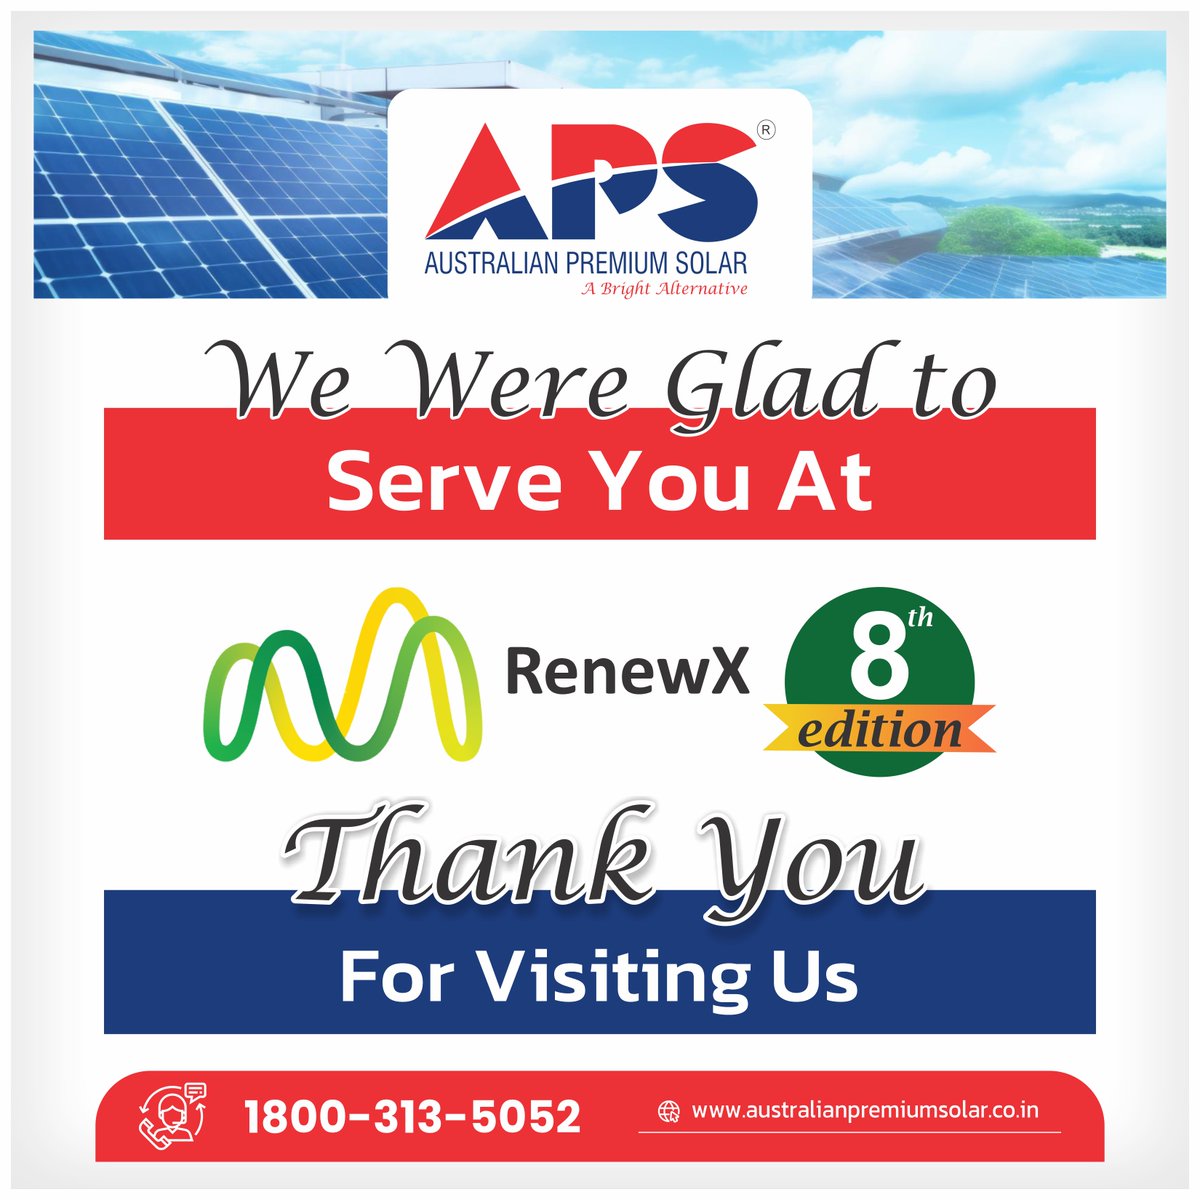 APS feels proud to meet and connect with you all at #RenewX 8th edition. Thank you #Hyderabad for trusting us. Hope to see you again.

Contact us: 1800 313 5052 Now.

#renewx #RenewableFuture #AustralianPremiumSolar #APS #solarindustry